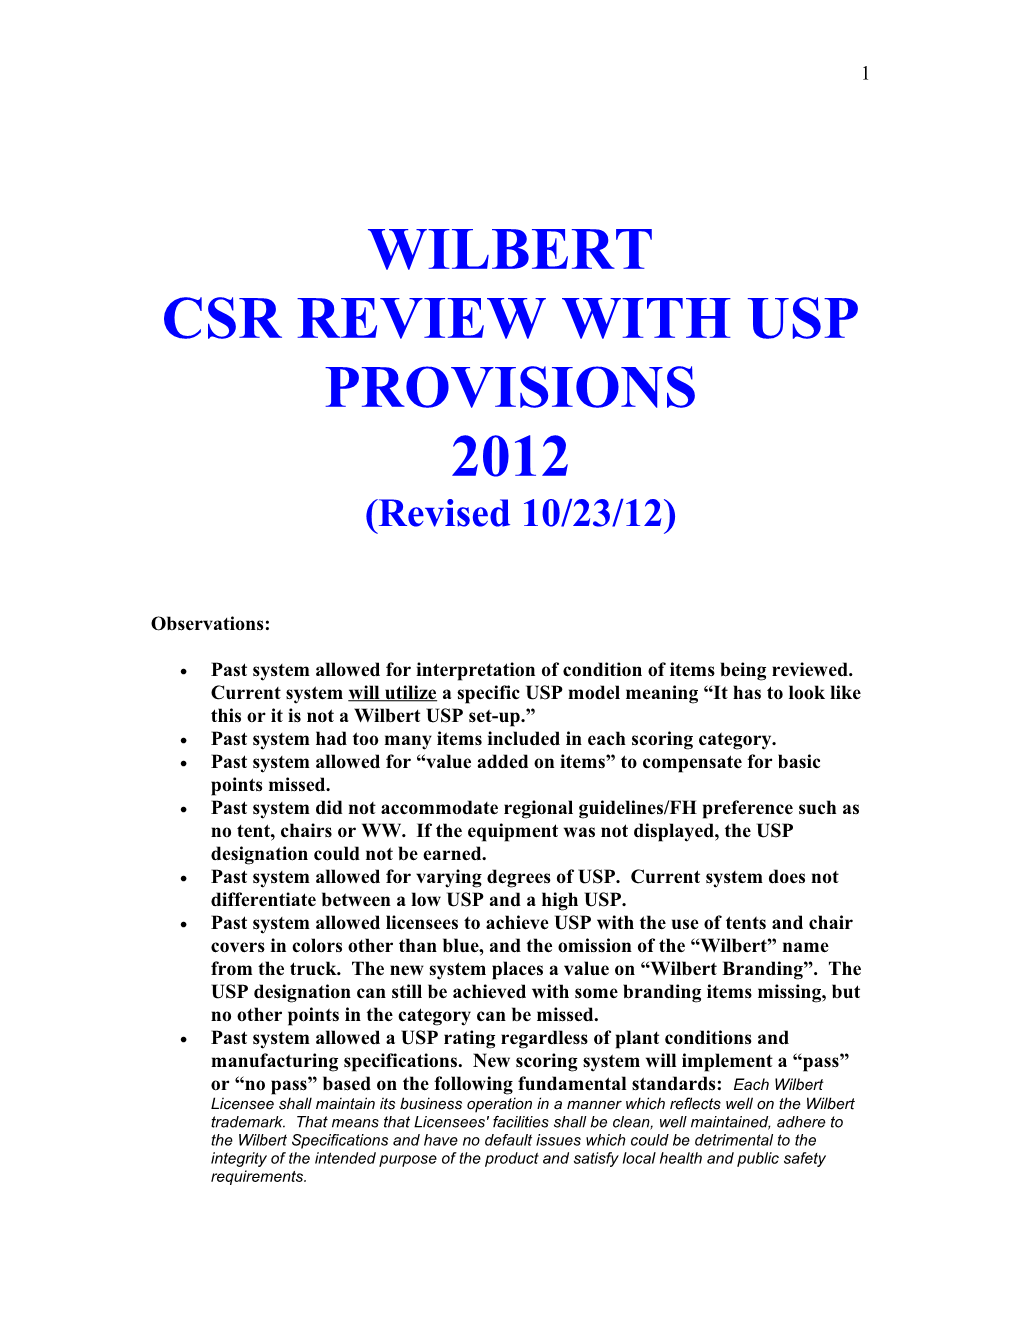 Csr Review with Usp Provisions